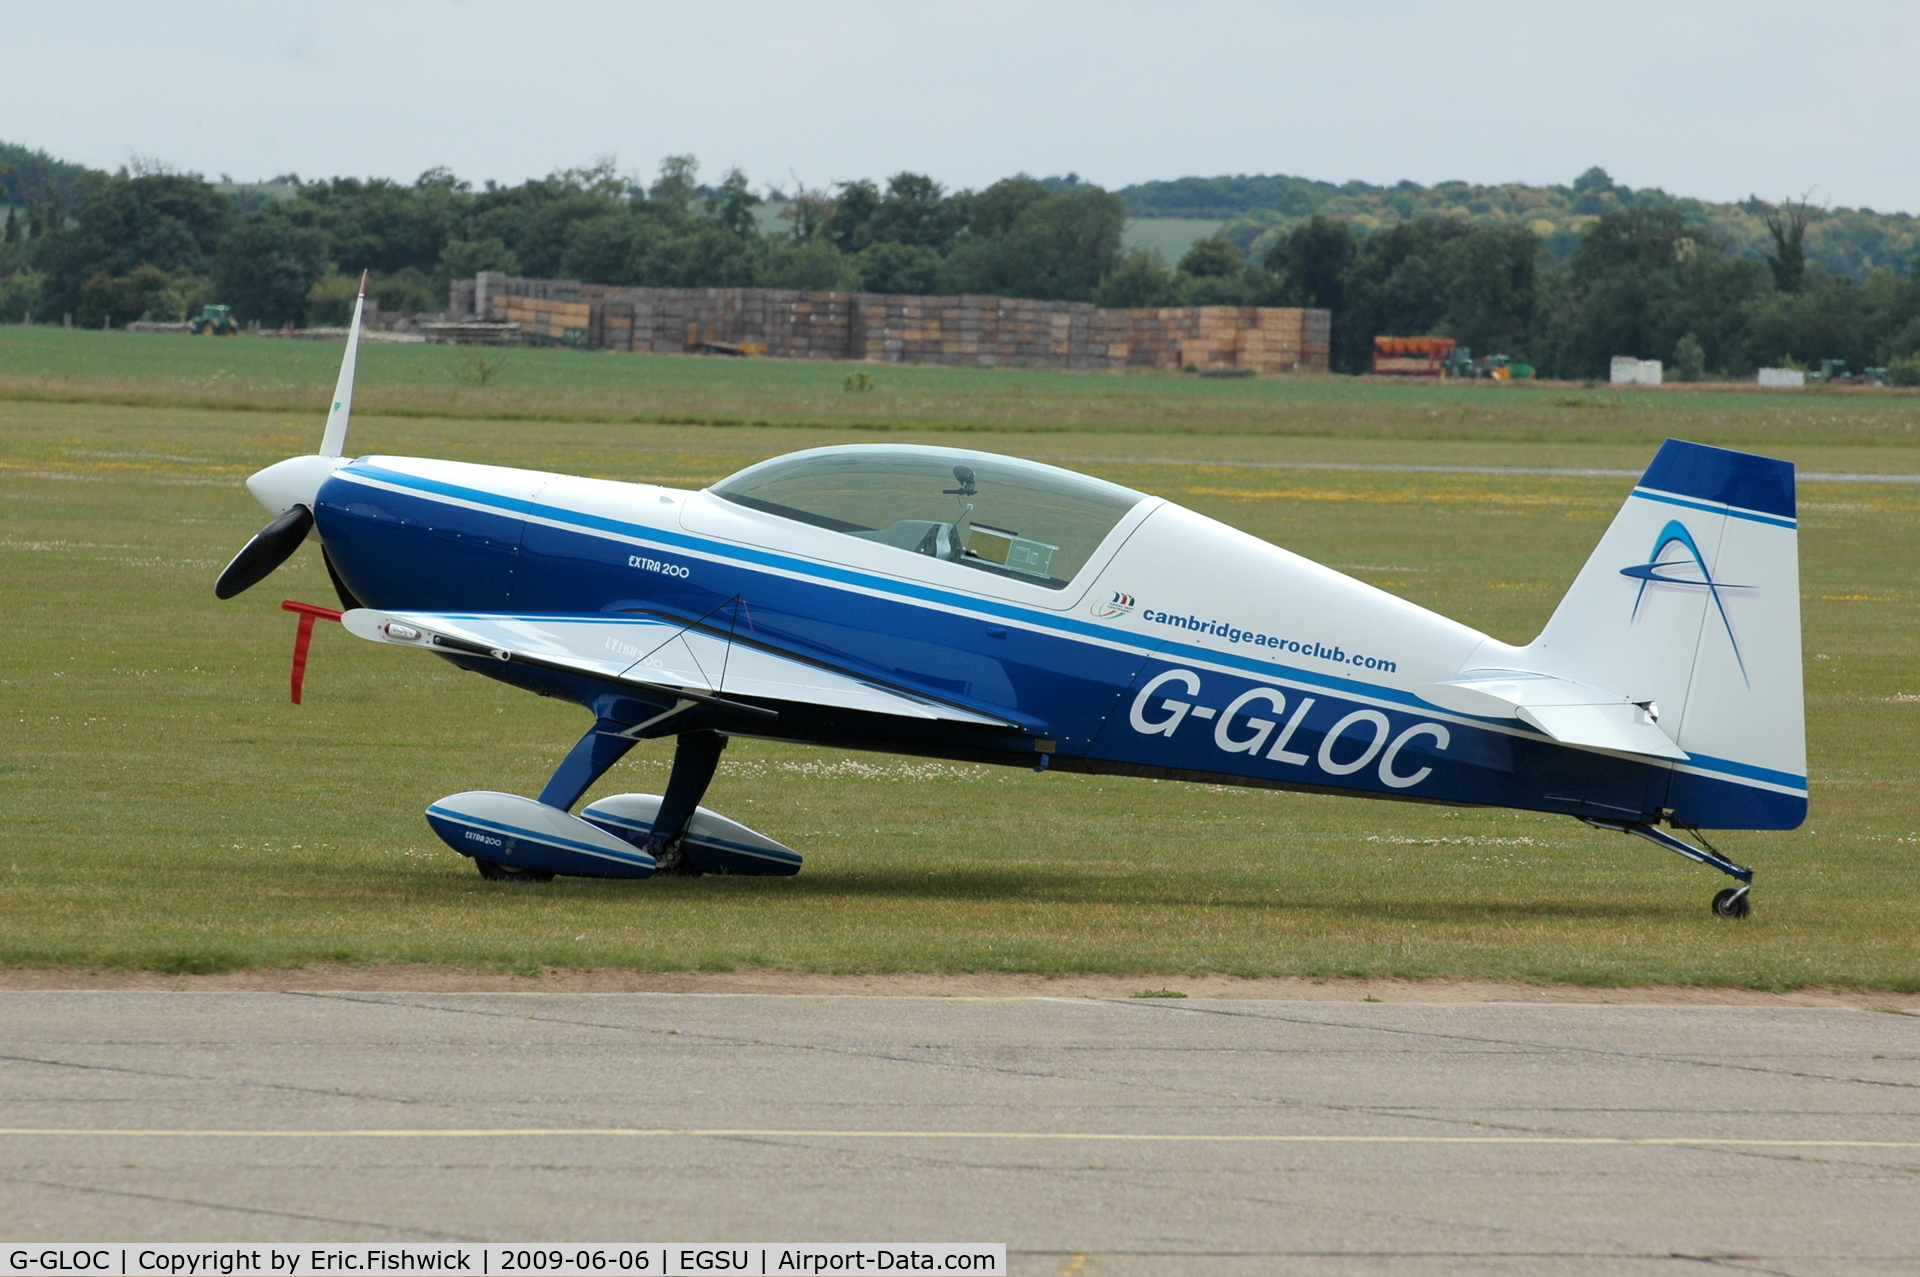 G-GLOC, 2007 Extra EA-300/200 C/N 1039, 1. G-GLOC at The Duxford 90th Challenge Cup Aerobatics Competition